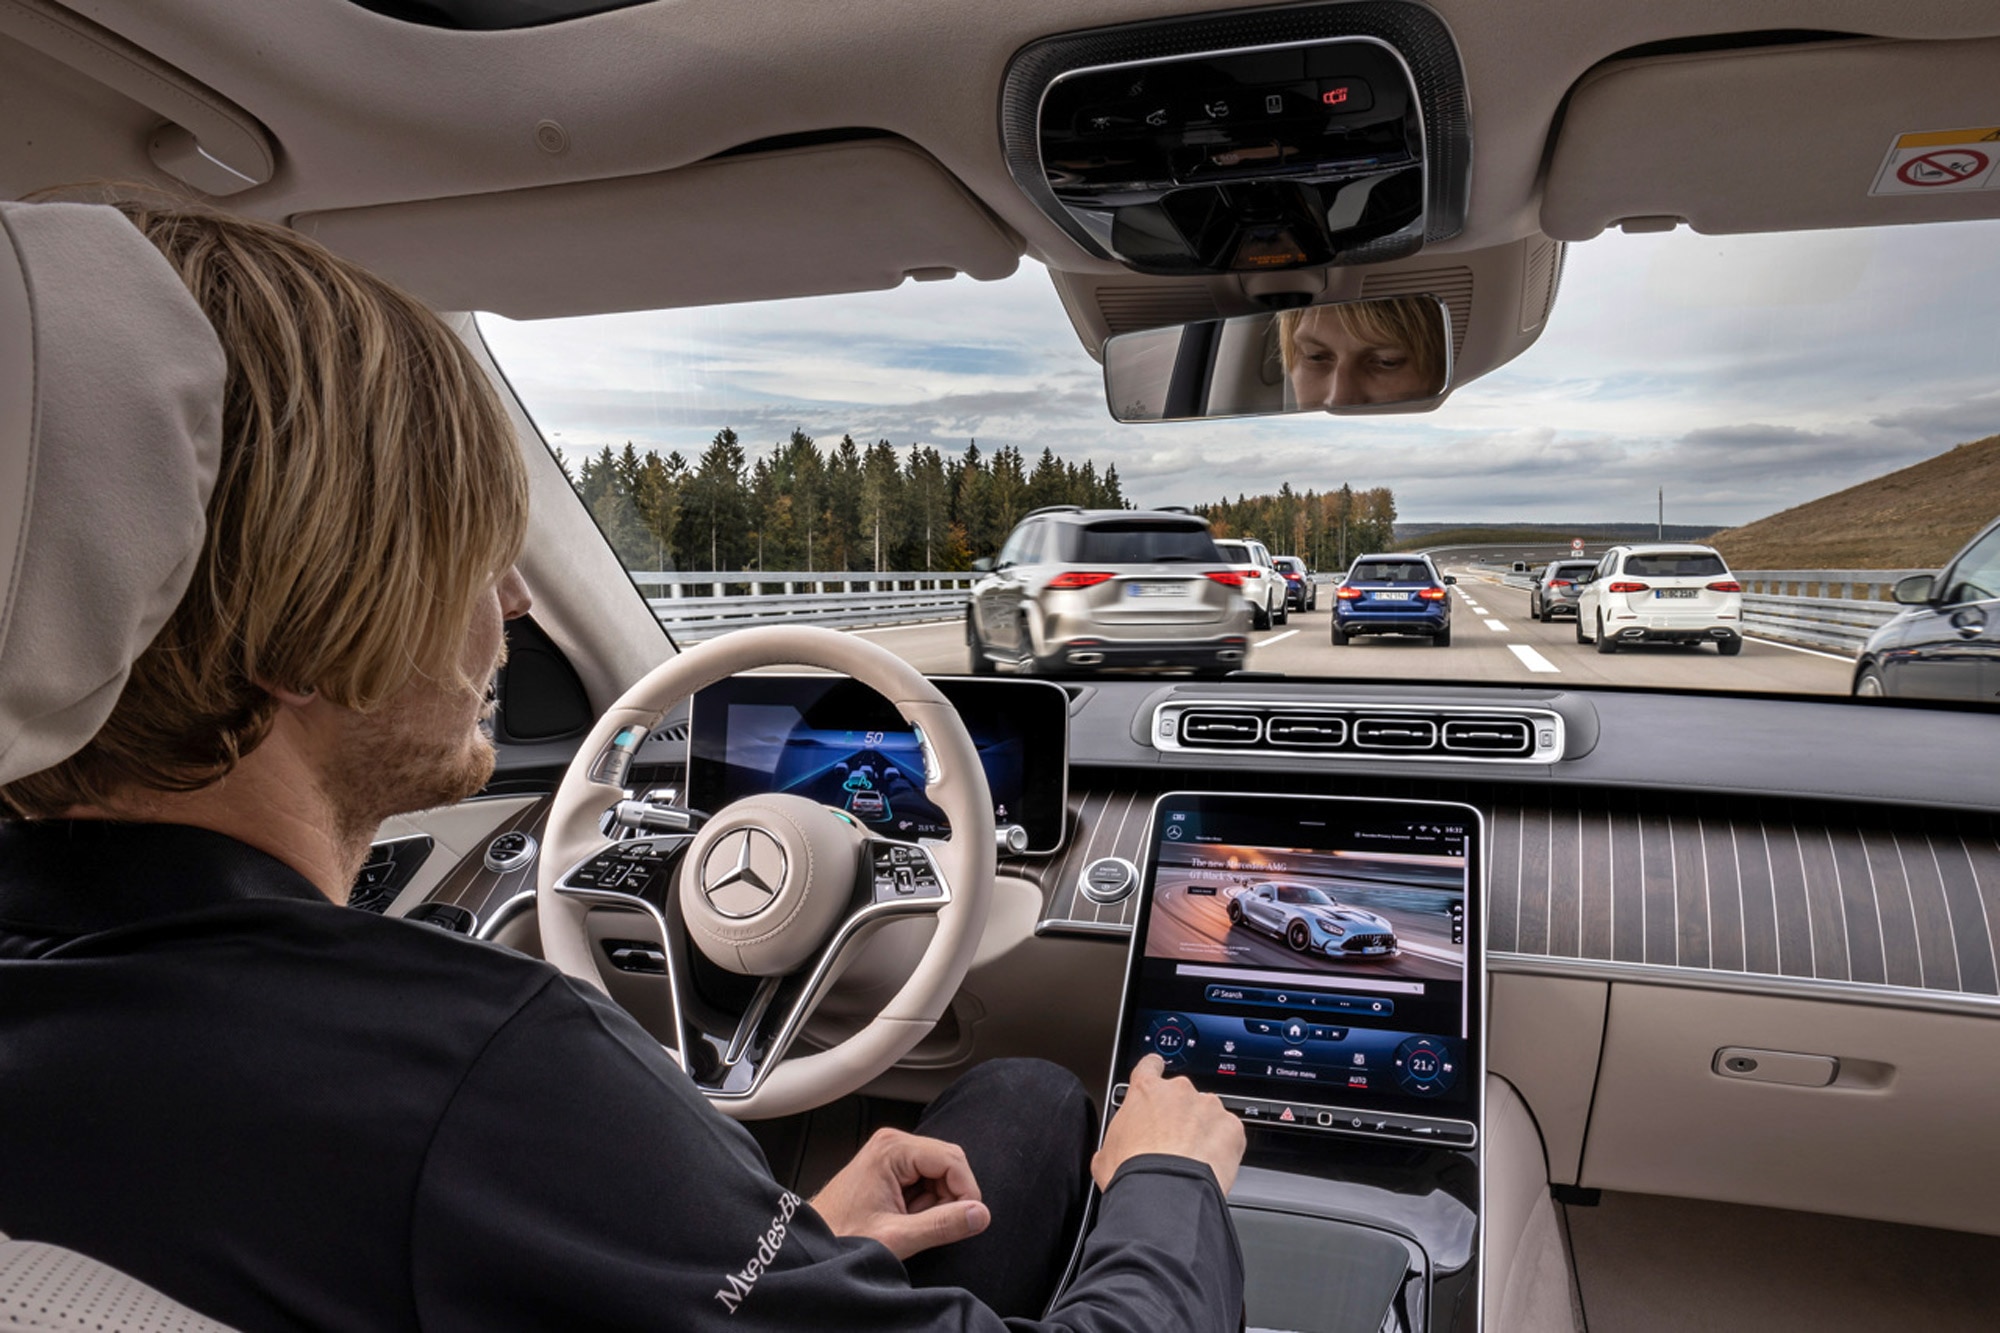 A driver demonstrates how Level 3 autonomous control works in a Mercedes-Benz.